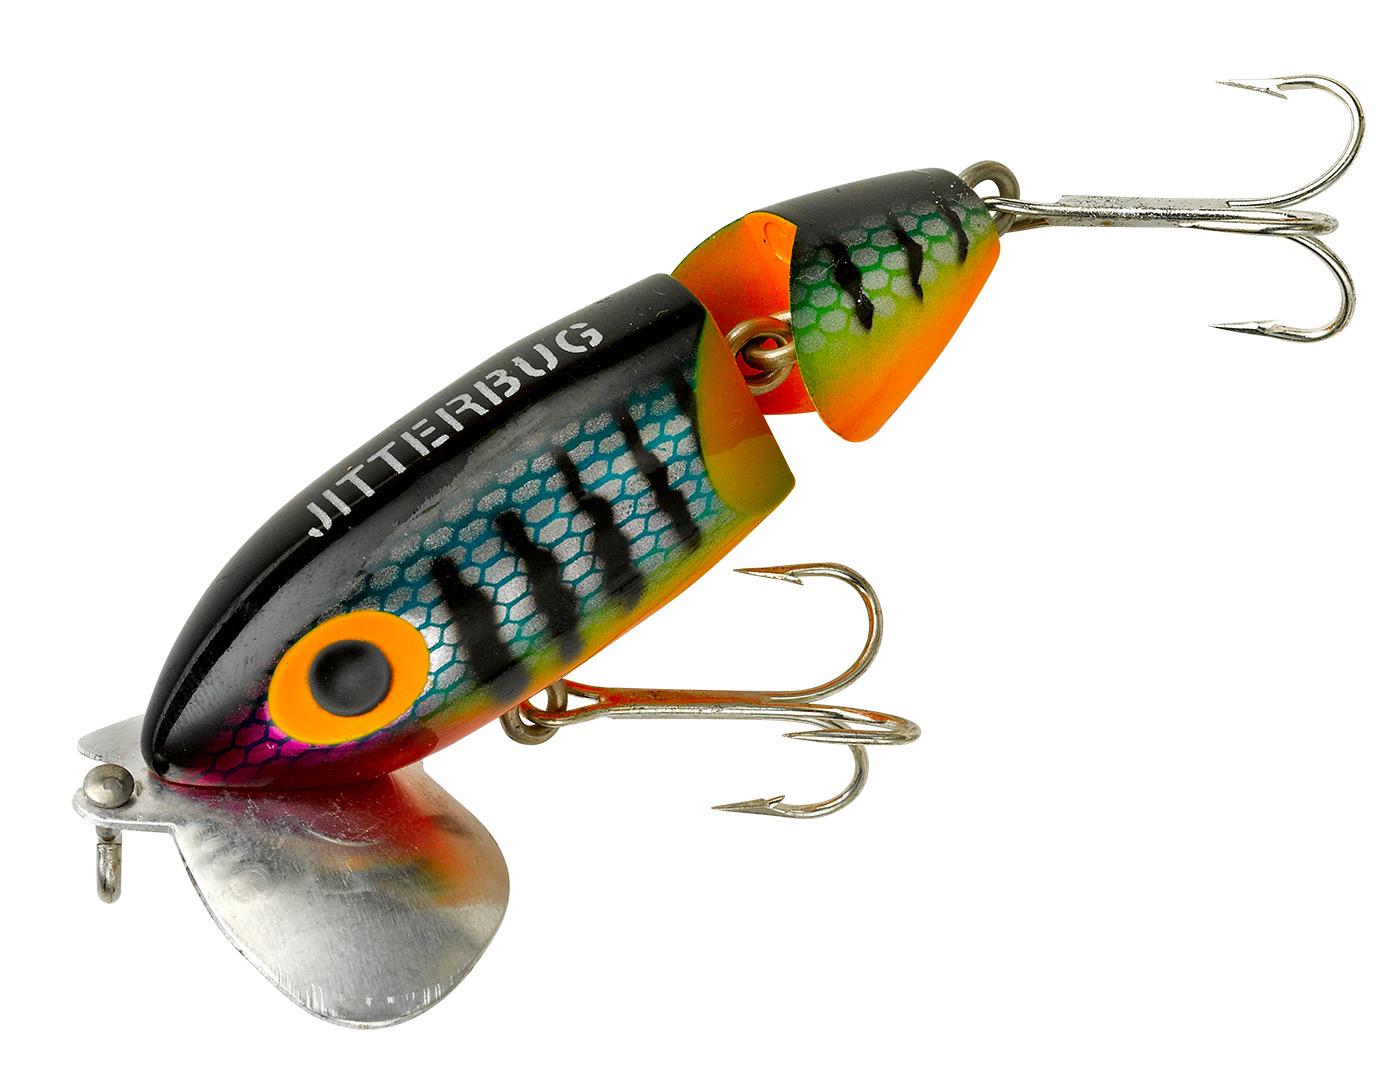 Arbogast G620-05 Jointed Jitterbug Topwater Lure 2 1/2" 3/8 oz